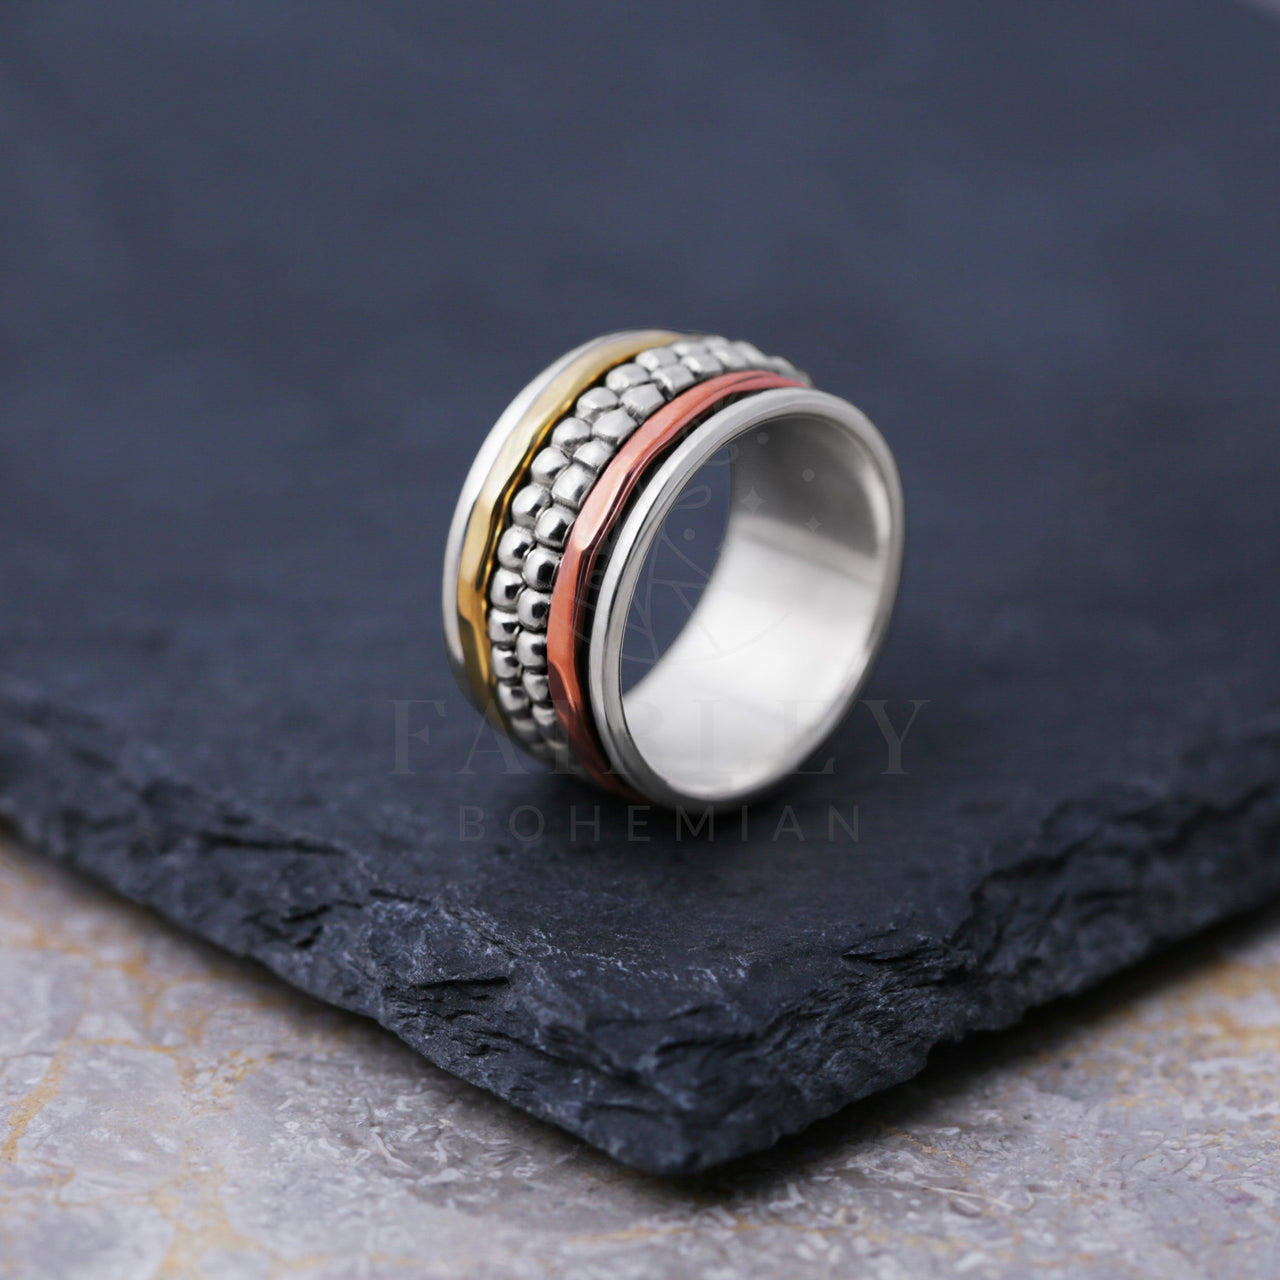 bohemian style spinner ring handmade solid sterling 925 silver